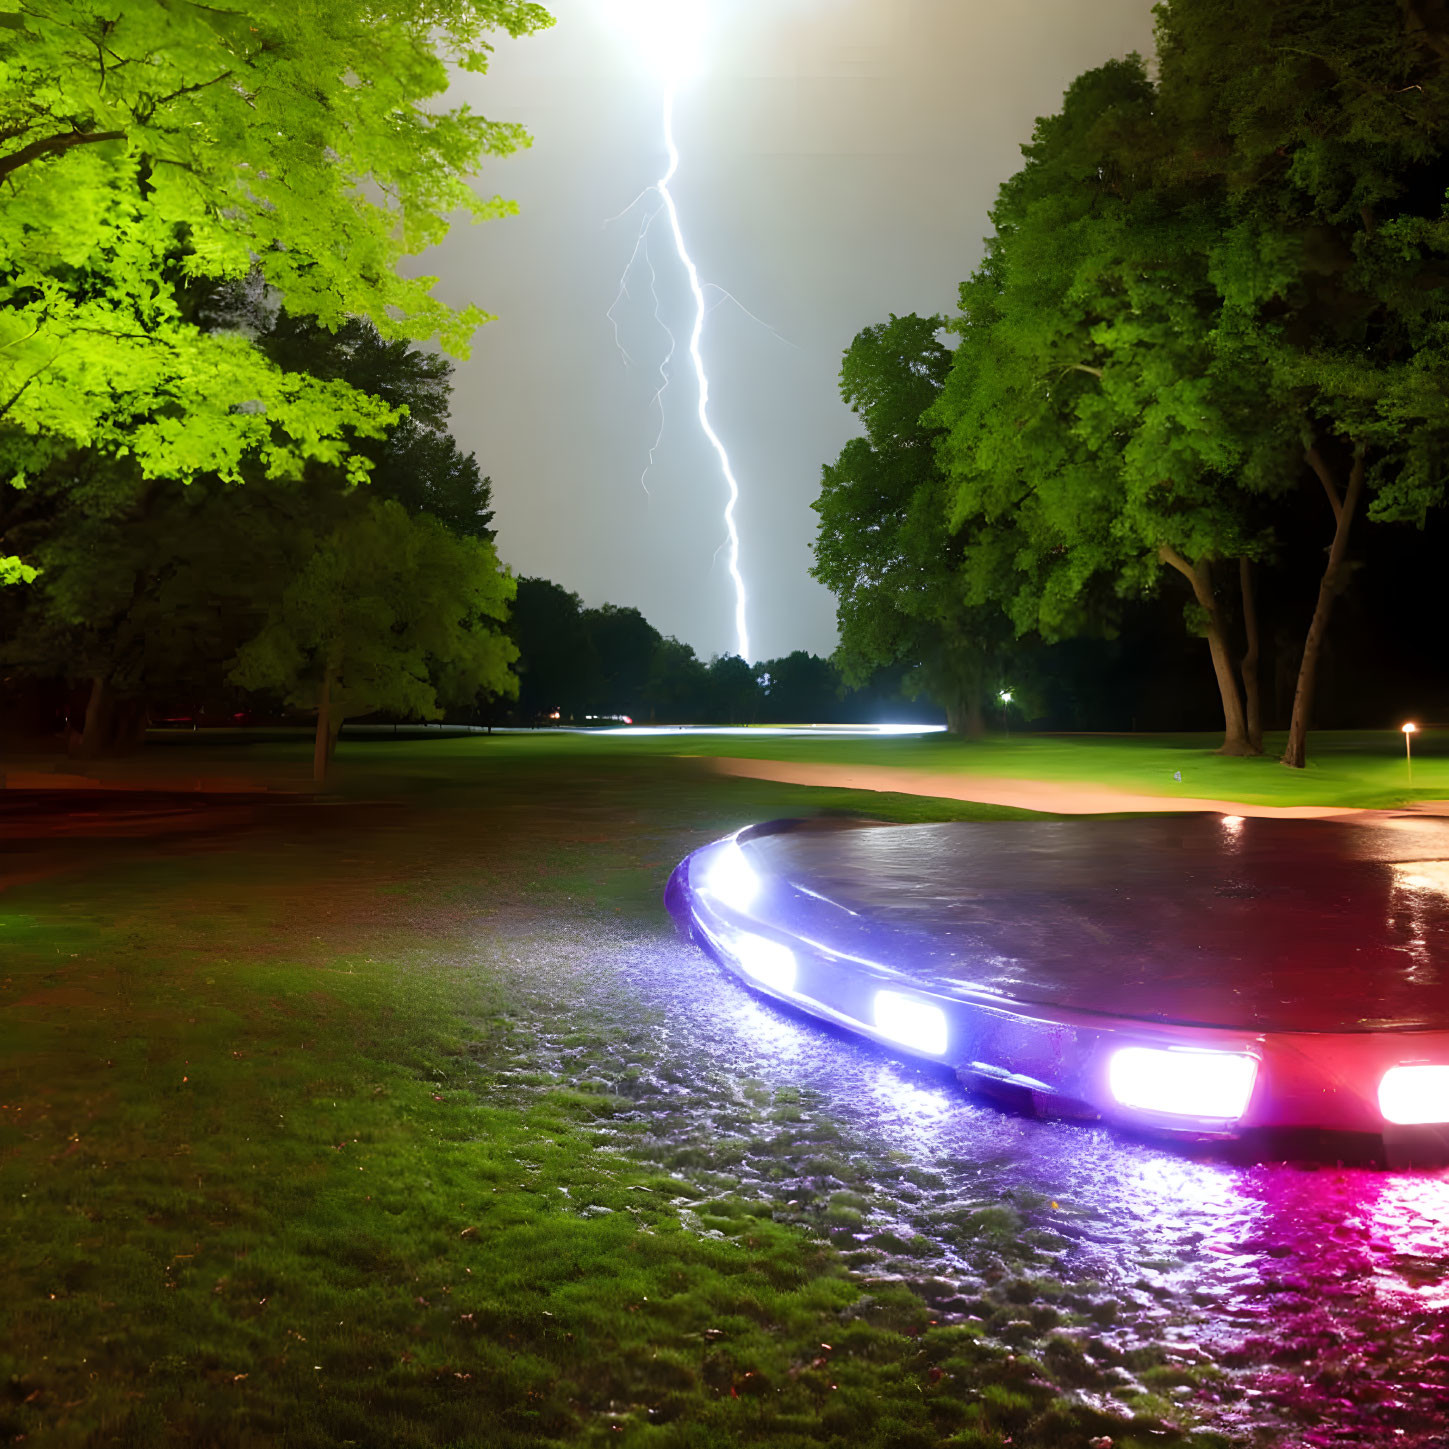 Nighttime park scene: lightning bolt, green trees, curved path with purple lights